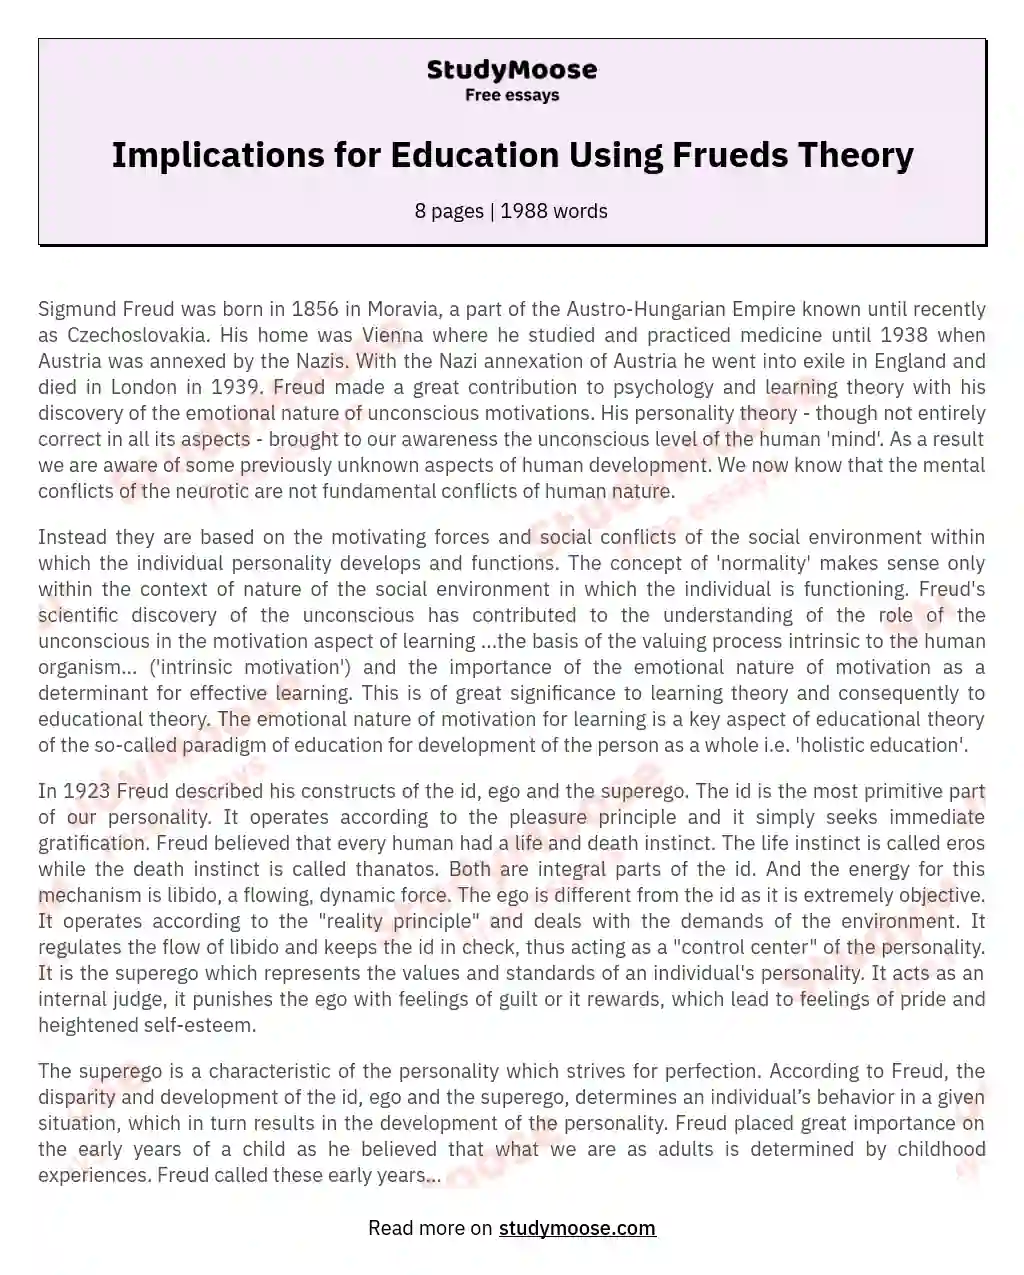 Implications for Education Using Frueds Theory essay